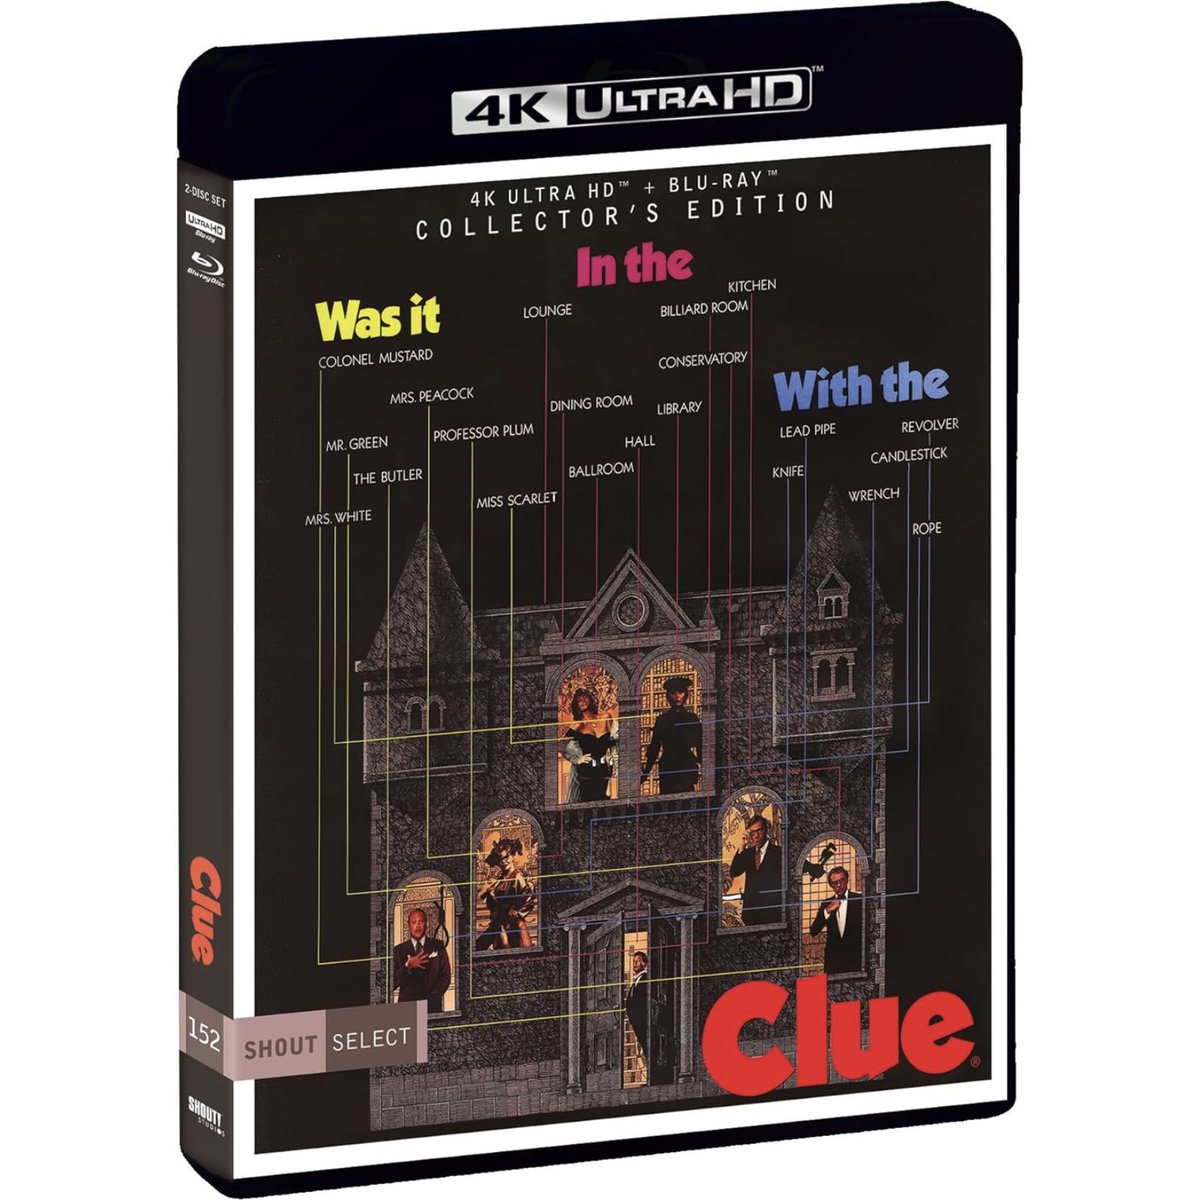 We are joined by “Clue” director Jonathan Lynn on “The Directors!” Part two is available now wherever you get your podcasts. To celebrate, we’re giving away copies of “Clue” 4K UHD by Shout Factory! To enter, tell us your favorite moment from the film. link.chtbl.com/jlt